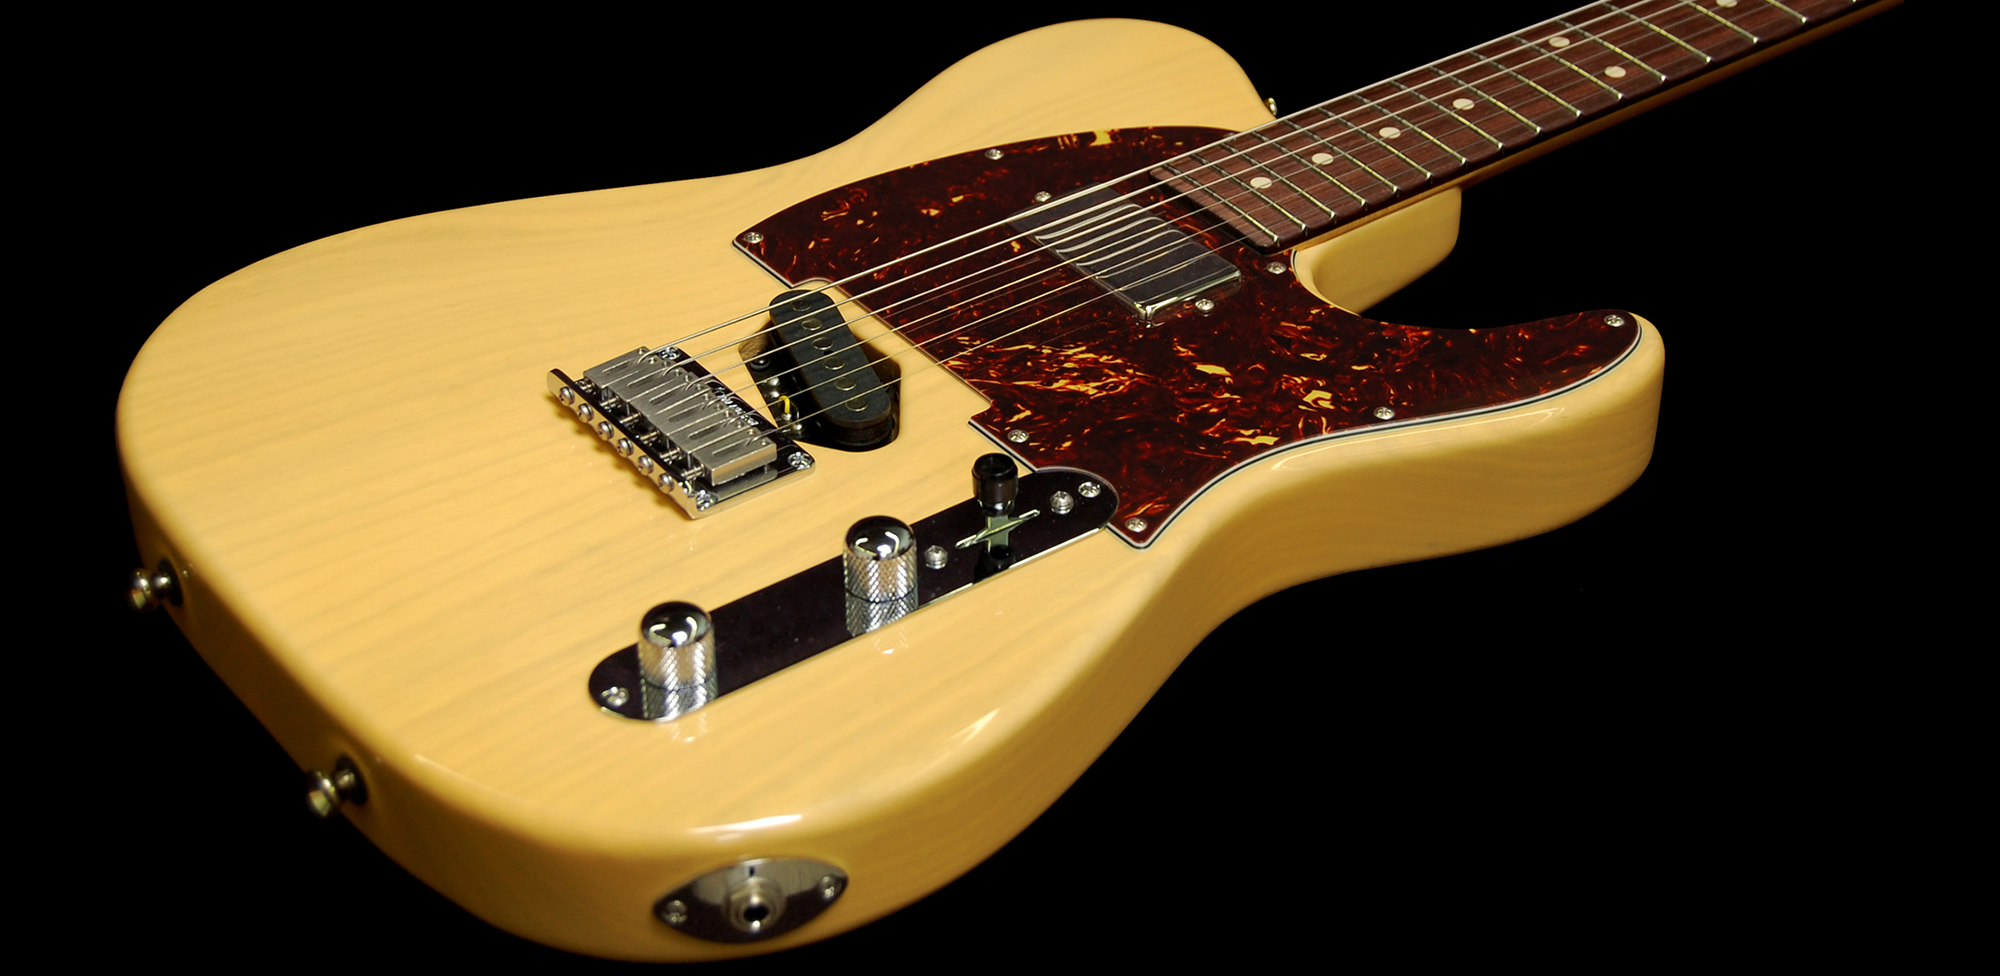 T Classic｜Products｜Tom Anderson Guitar｜JES International, Inc.